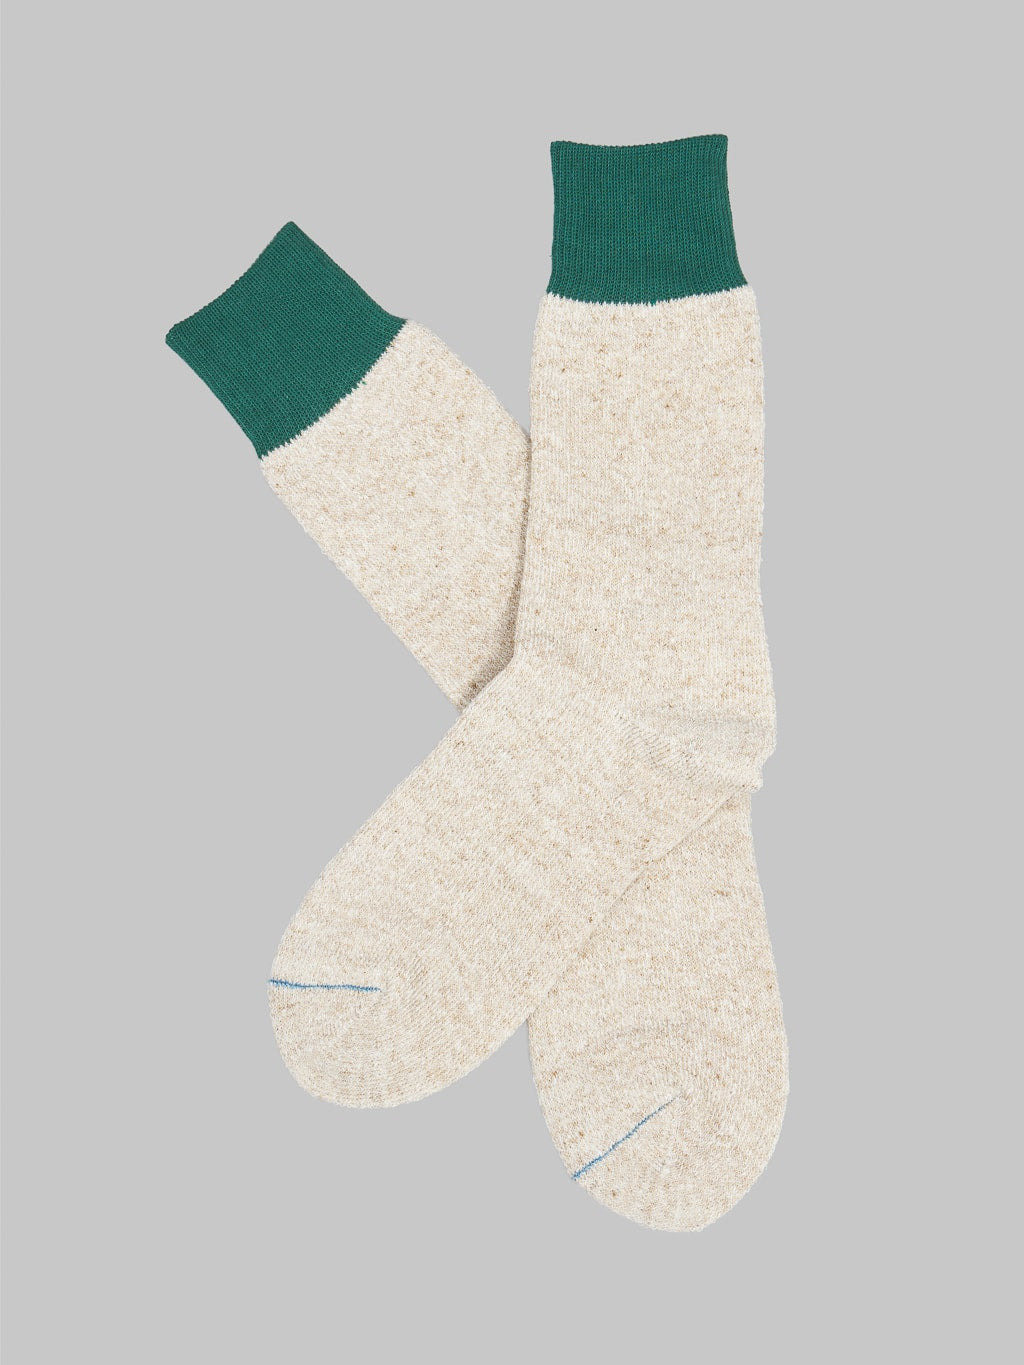 Rototo Double Face Socks Green Beige Texture